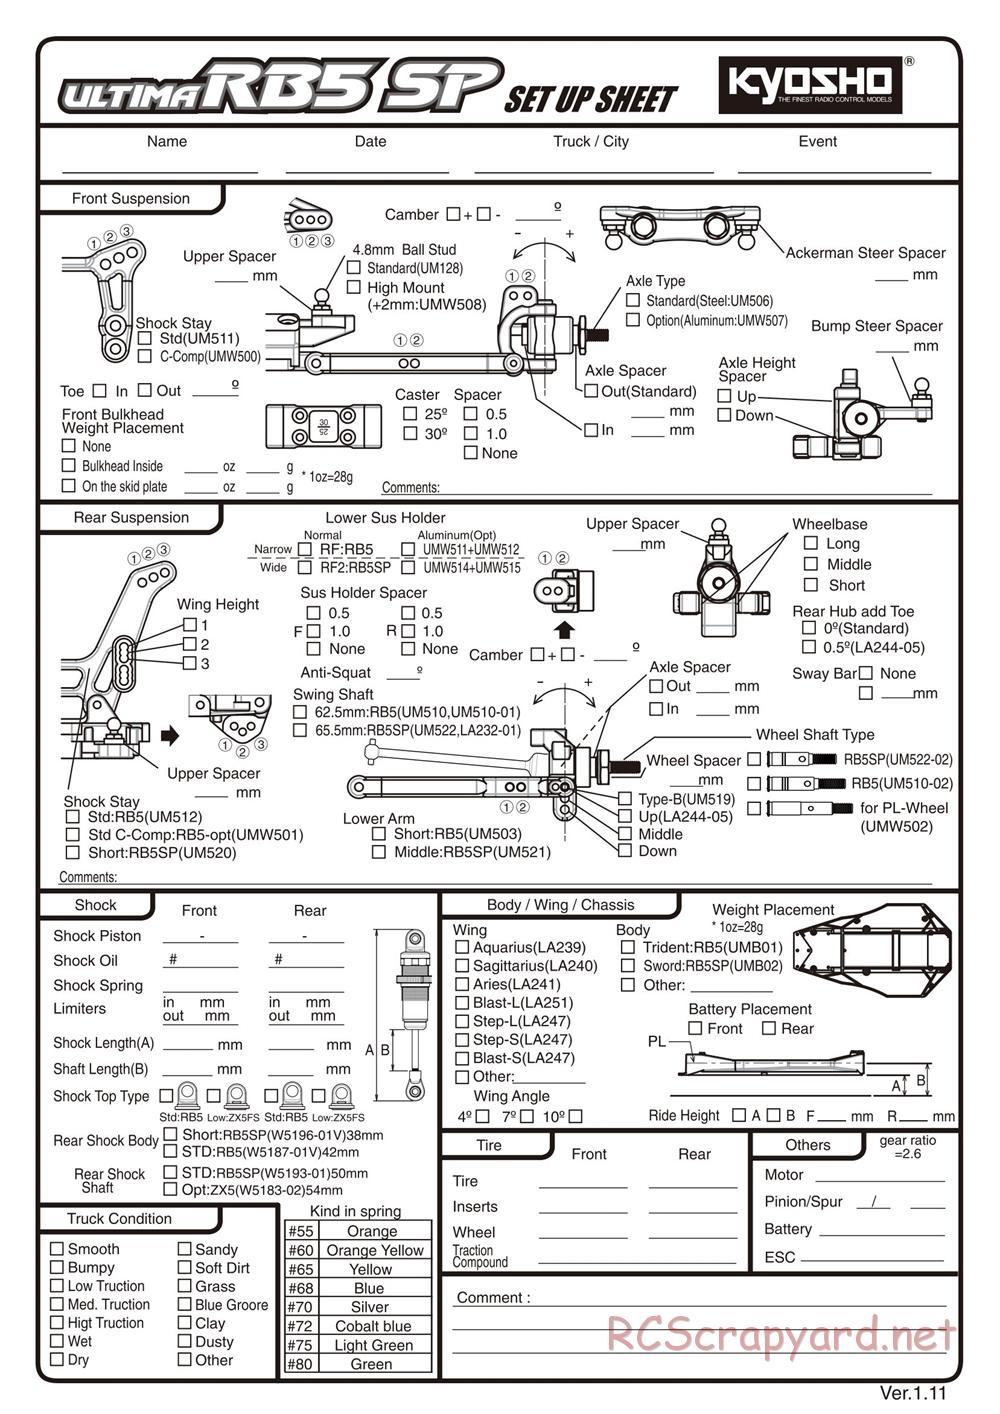 Kyosho - Ultima RB5 SP - Manual - Page 38